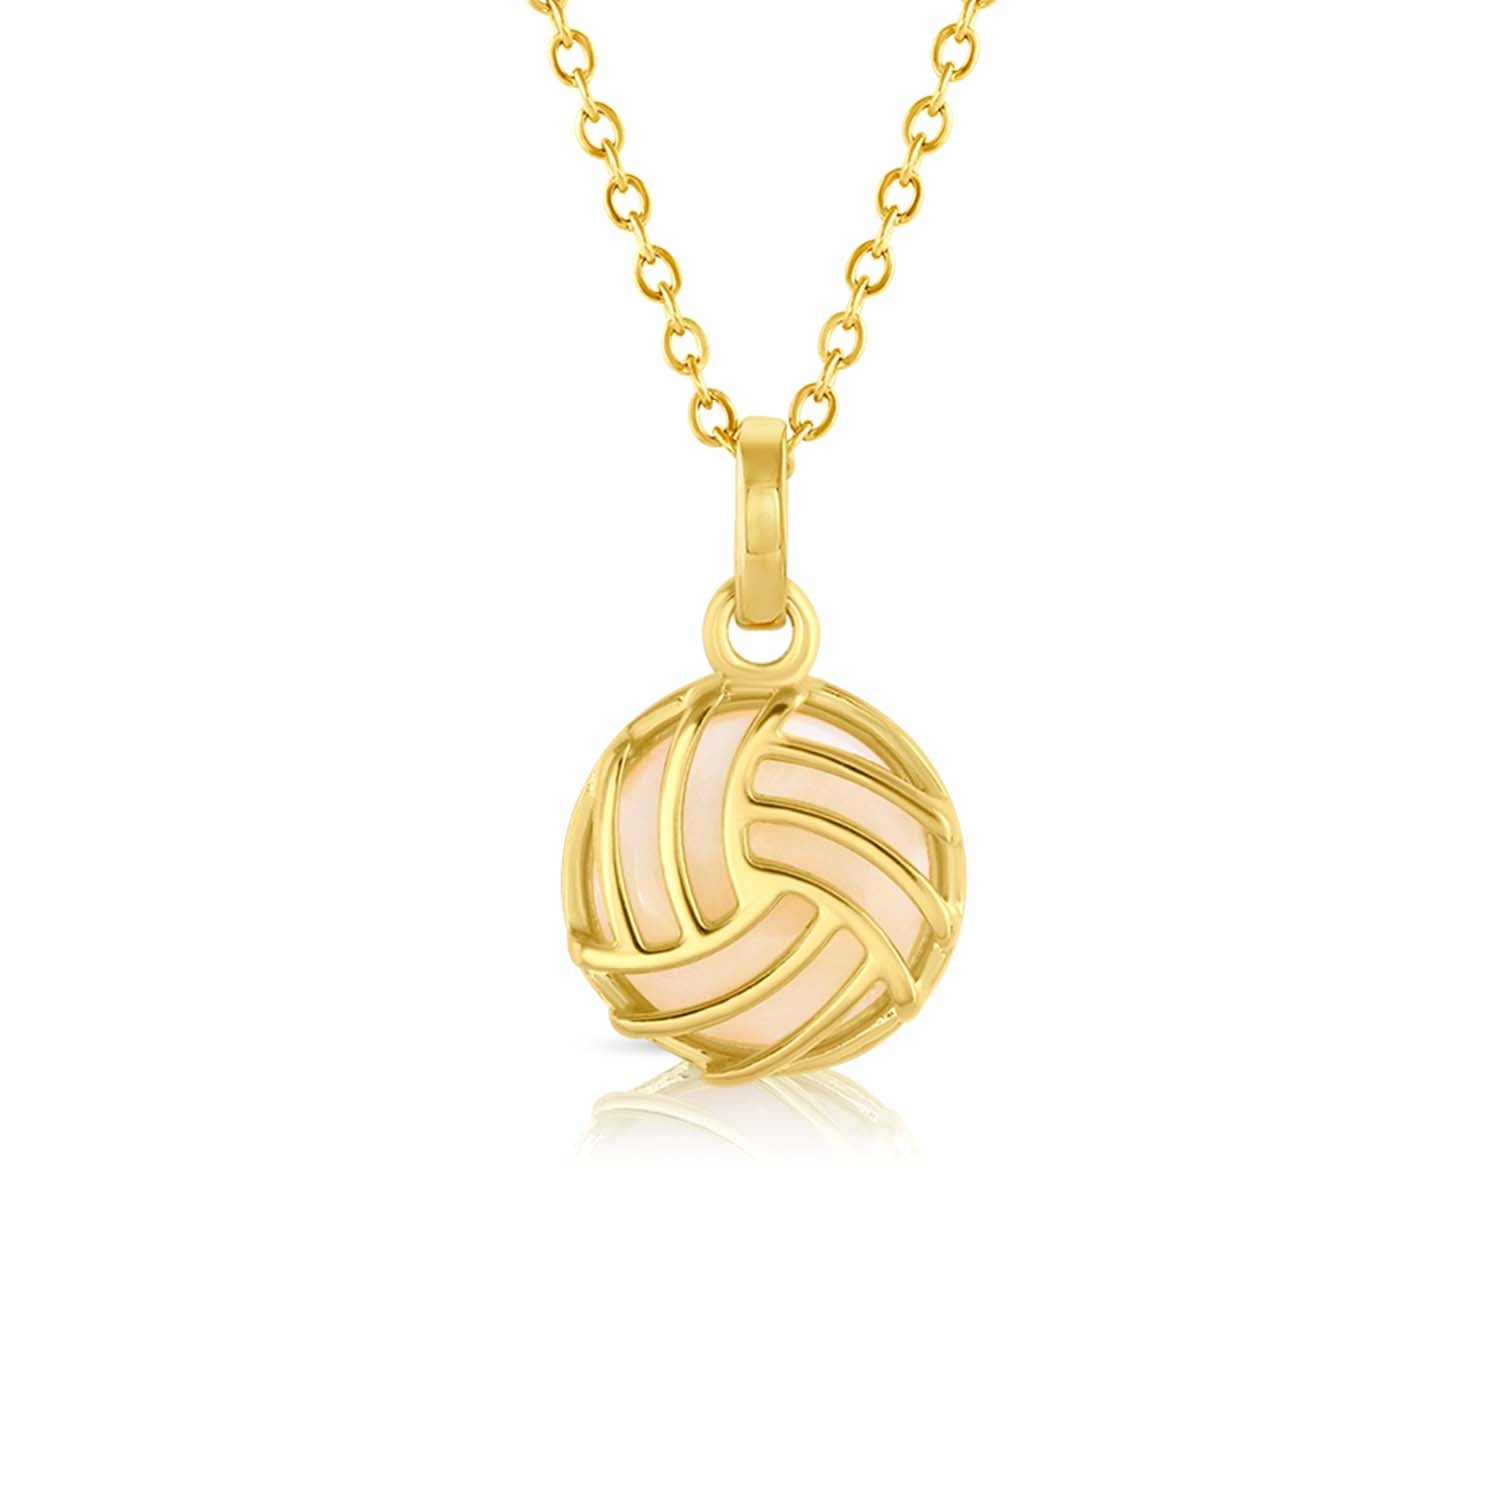 Volleyball charm necklace in mother of pearl,  handmade jewelry made by born to rock jewelry